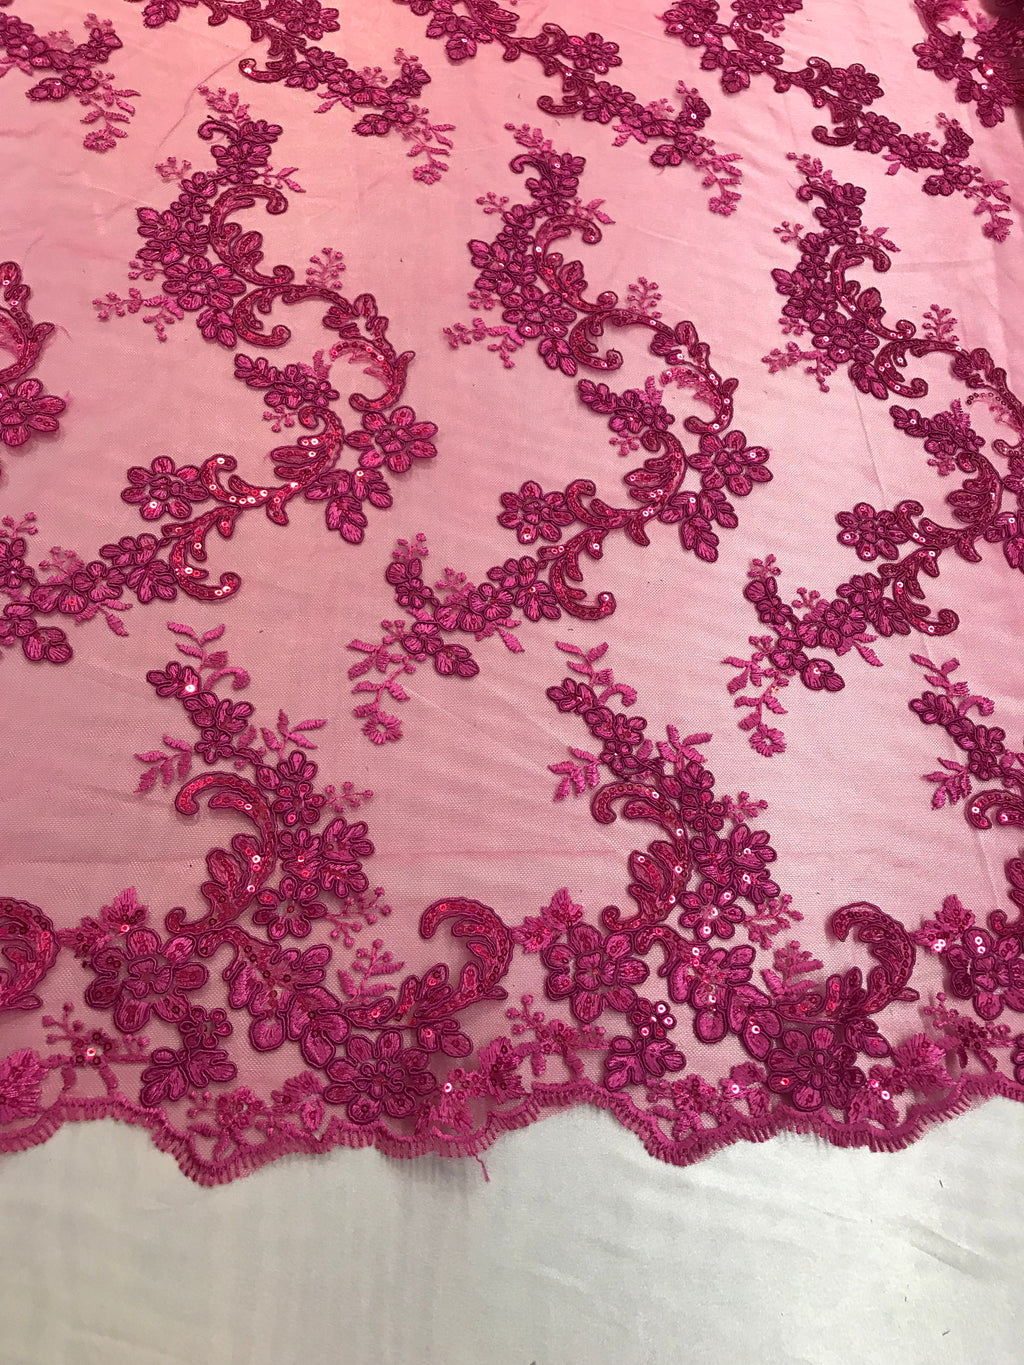 Floral Lace Fabric - Magenta - Flowers Embroidery Sequins Mesh Design